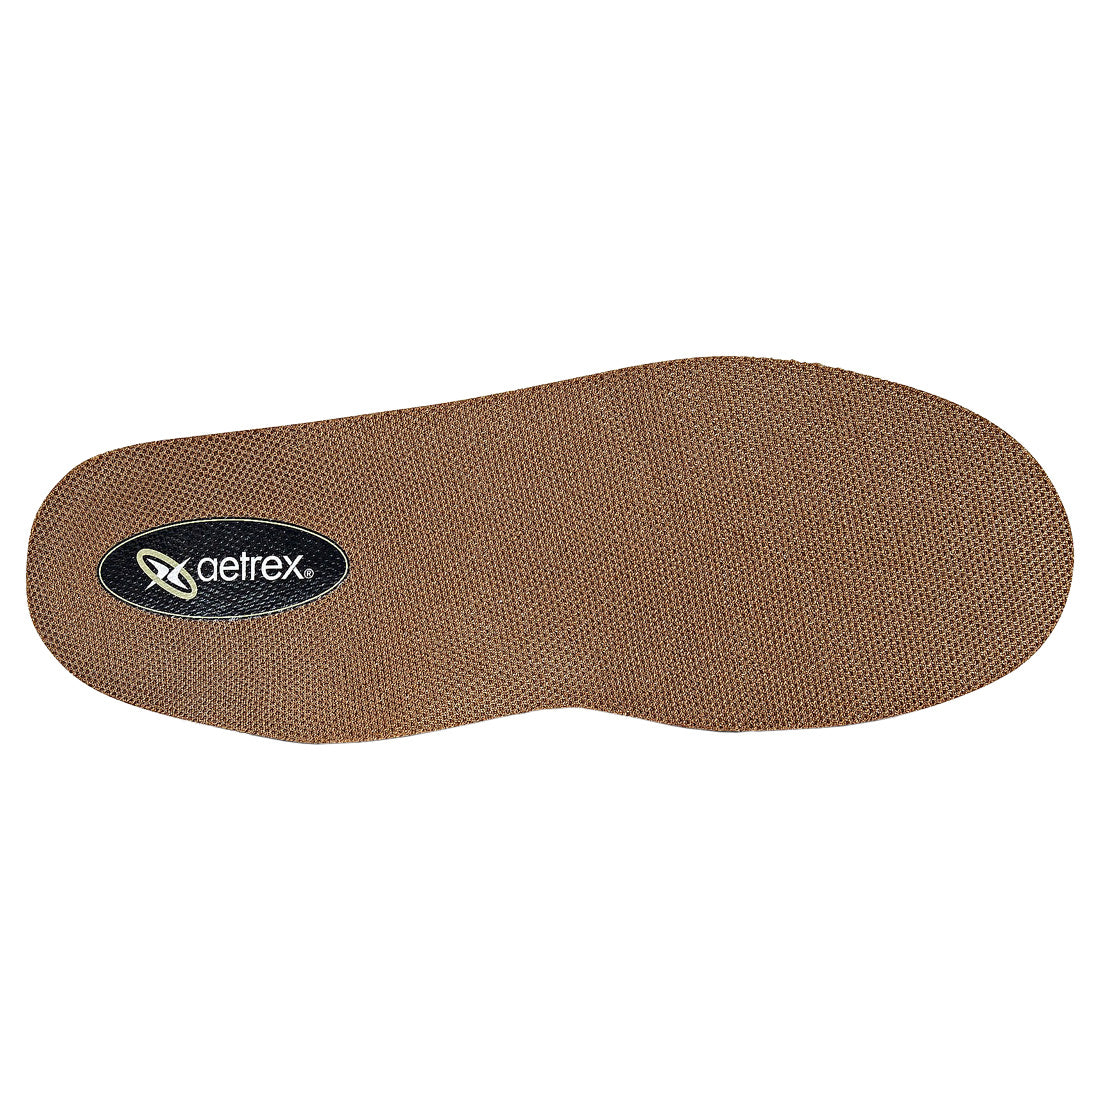 Aetrex Memory Foam Orthotic for Med/High Arch - Men's